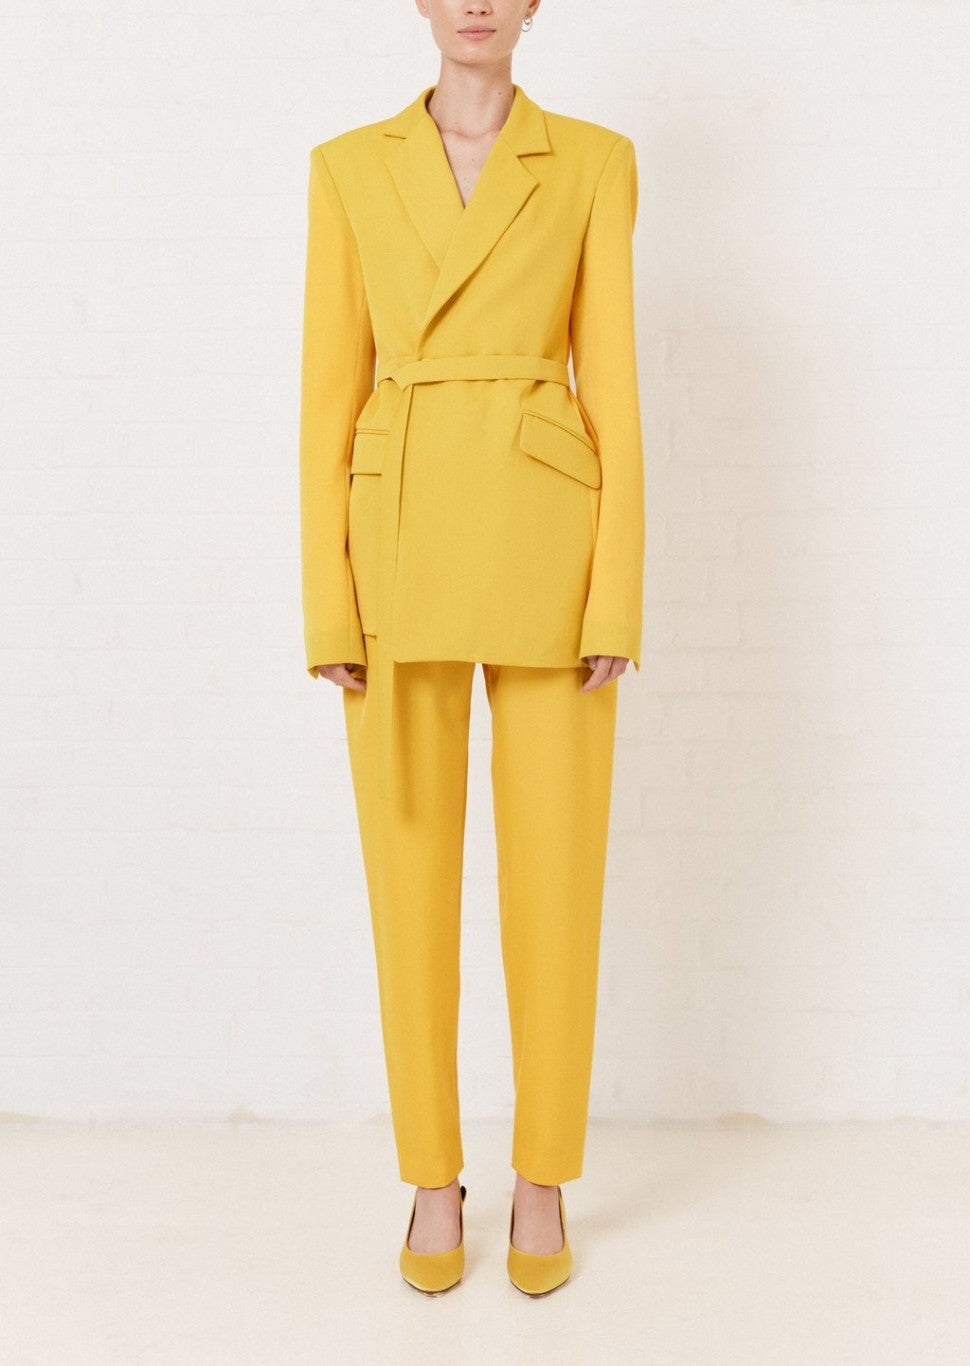 House of Holland yellow suit